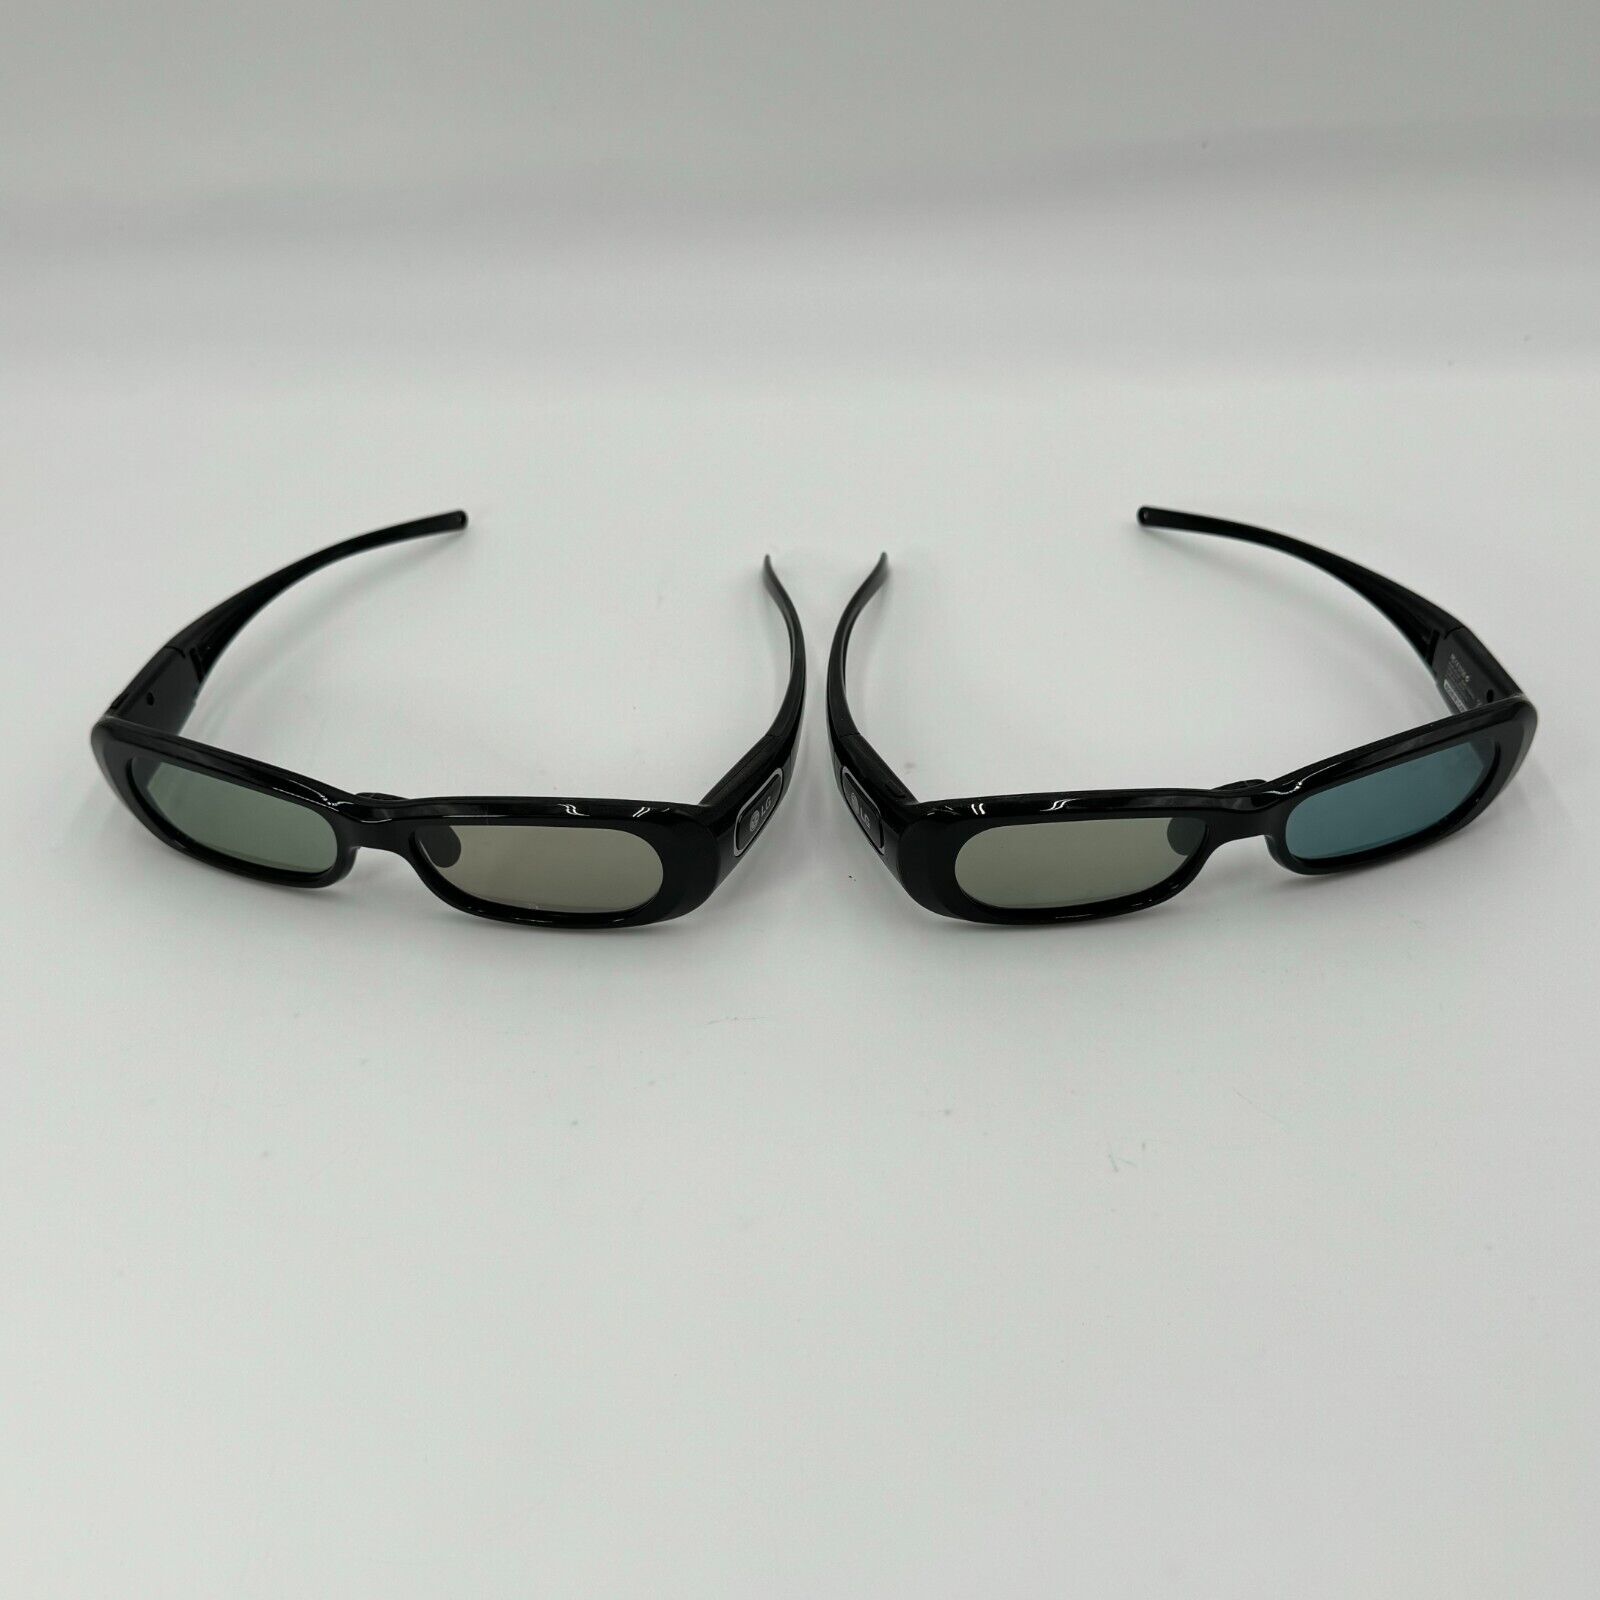 Pair of 2 LG 3D Glasses for TV and Projector AG-S250 New Open Box No Charger